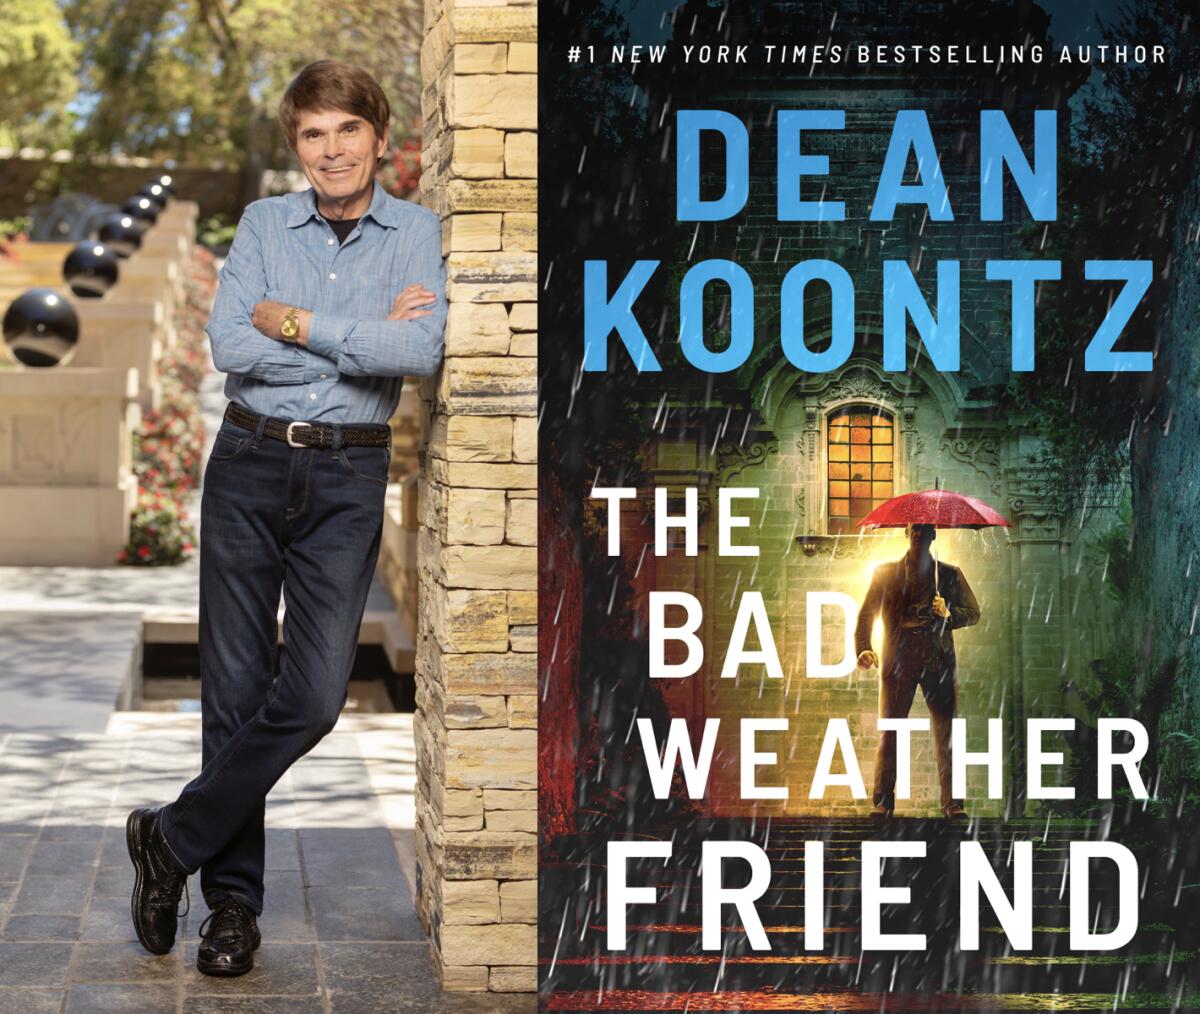 Dean Koontz is the author "The Bad Weather Friend."